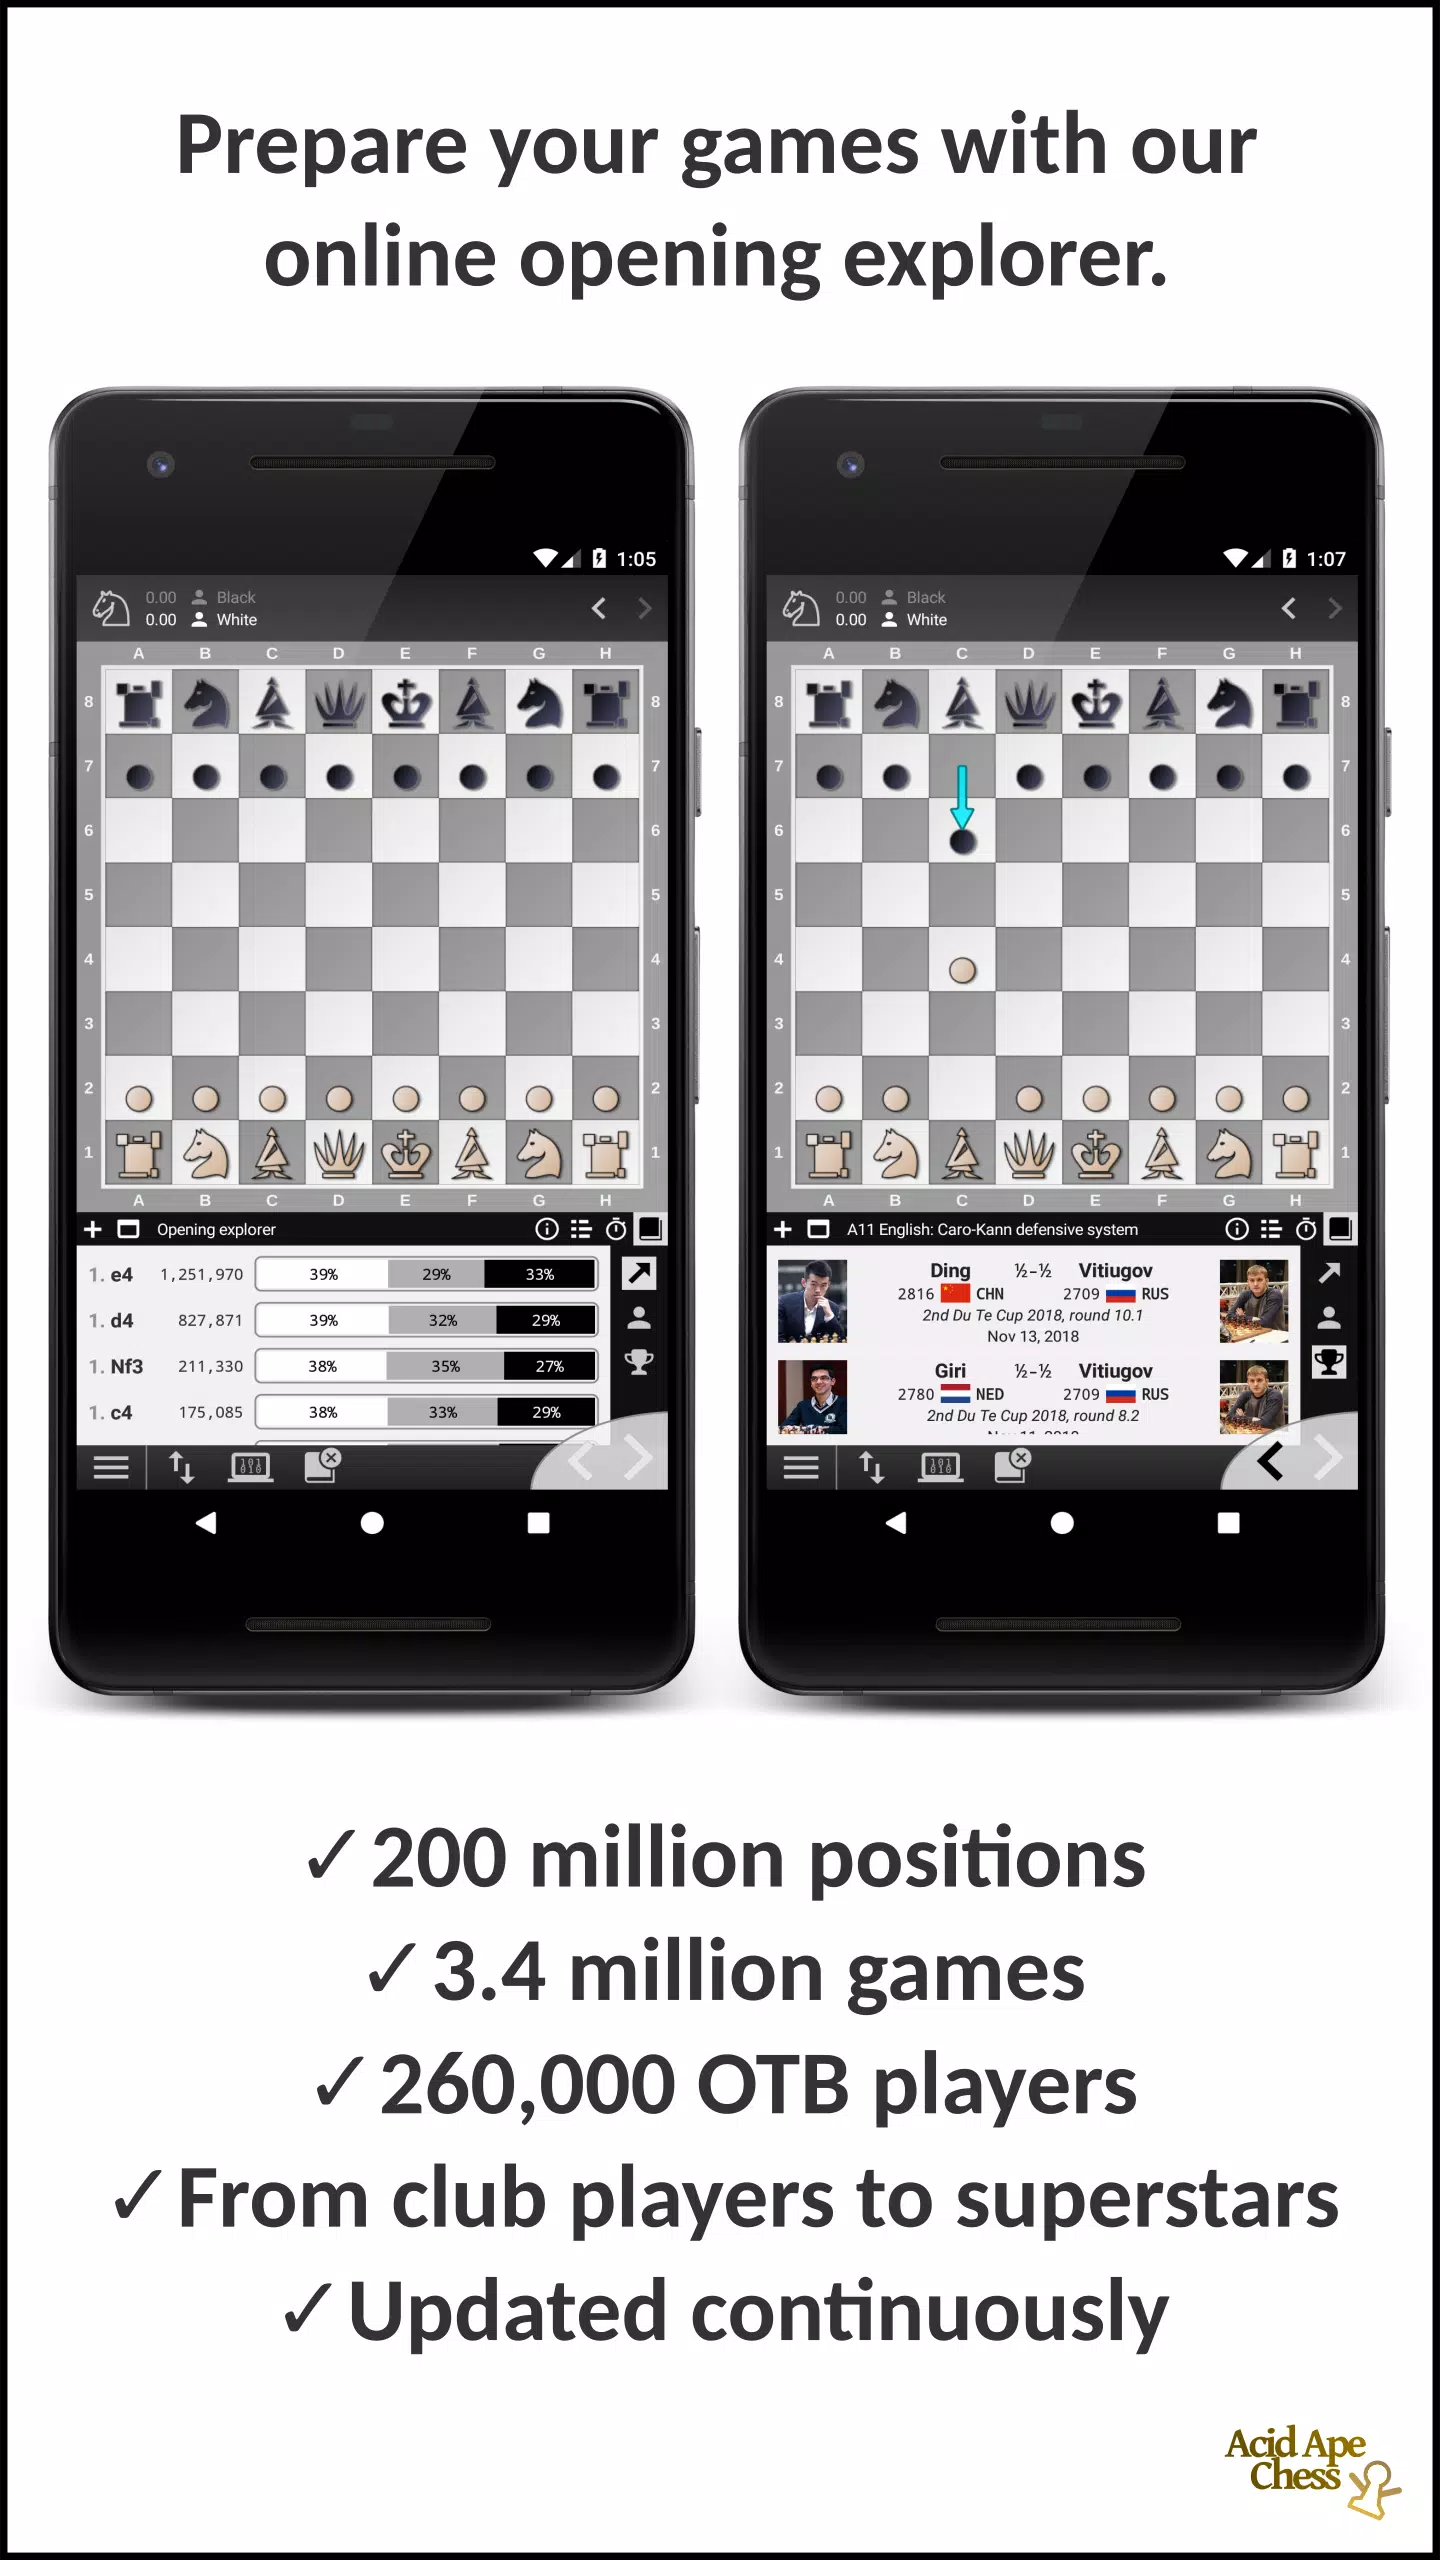 Download Auto Chess MOD APK v2.12.3 for Android